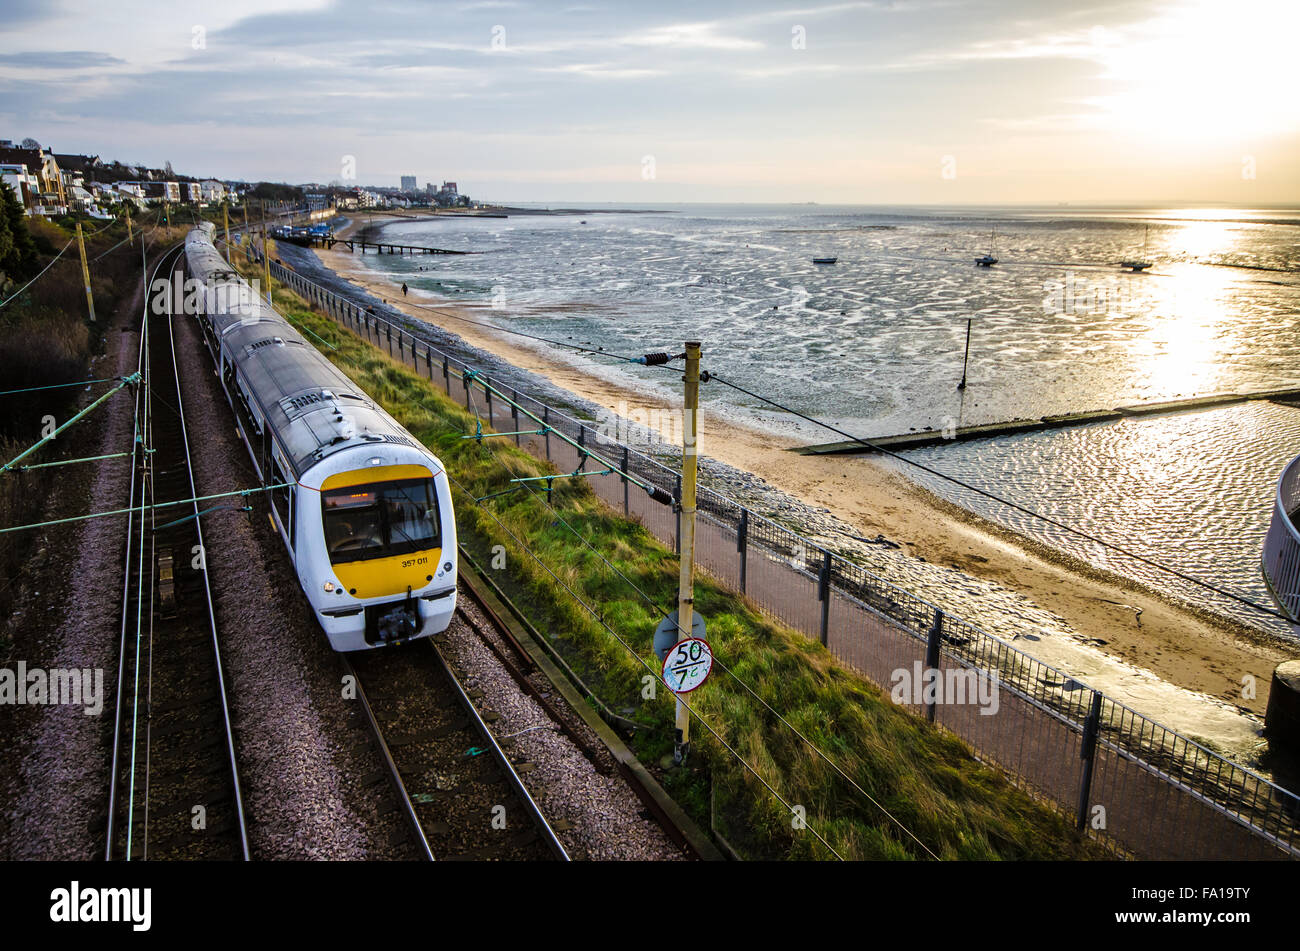 c2c is a British train operating company owned by Trenitalia running from London to Shoebury. Class 357 electric unit passing Thames Estuary Chalkwell Stock Photo